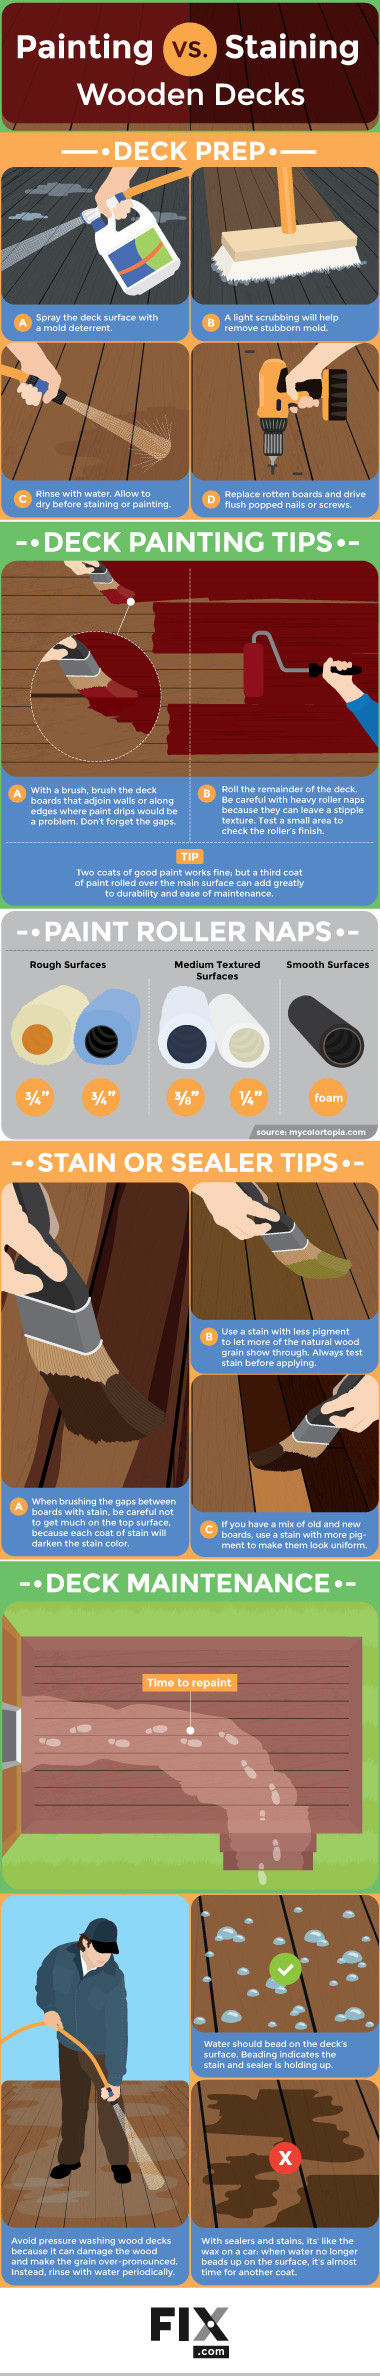 Deck Stain Vs Paint
 Painting or Staining a Wooden Deck